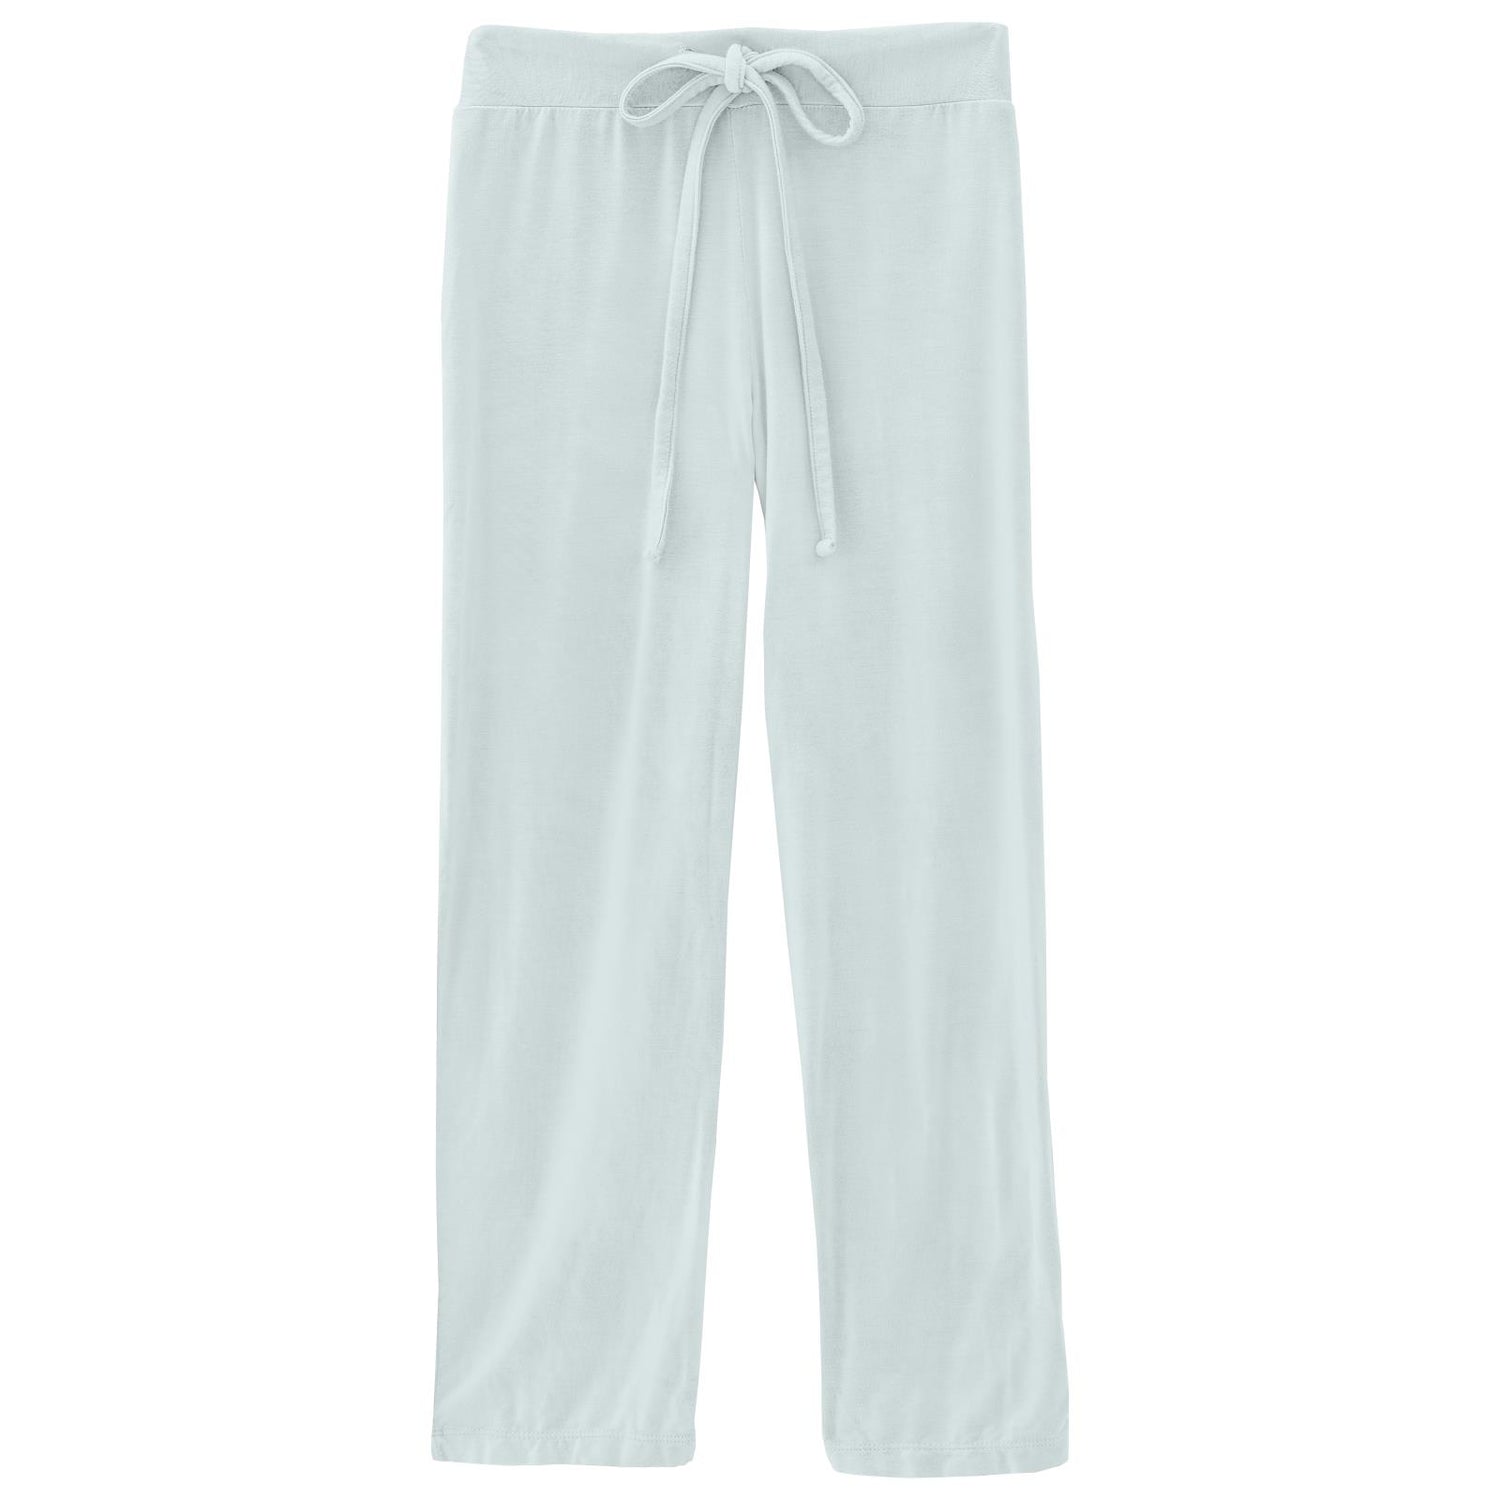 Relaxed Pants in Fresh Air